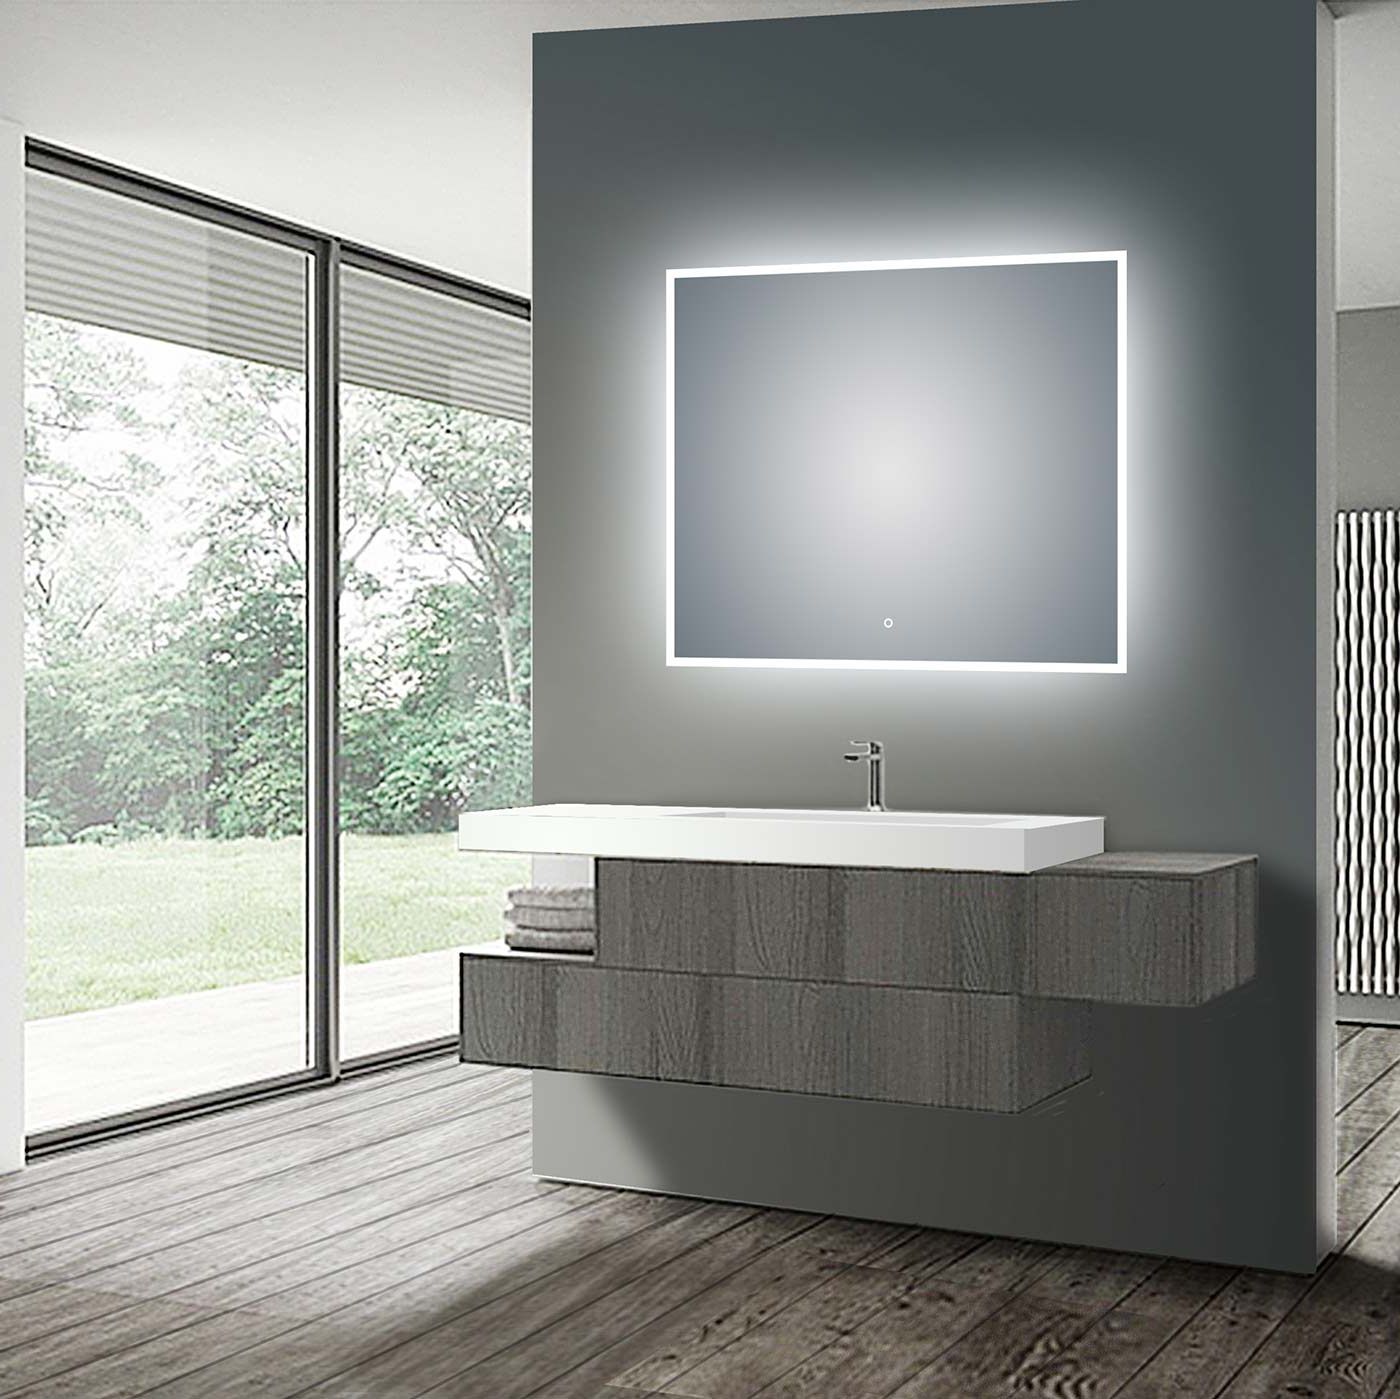 2020 High Wall Mirrors For Buy Led Illuminated Bathroom / Vanity Wall Mirror – Conceptbaths (View 3 of 15)